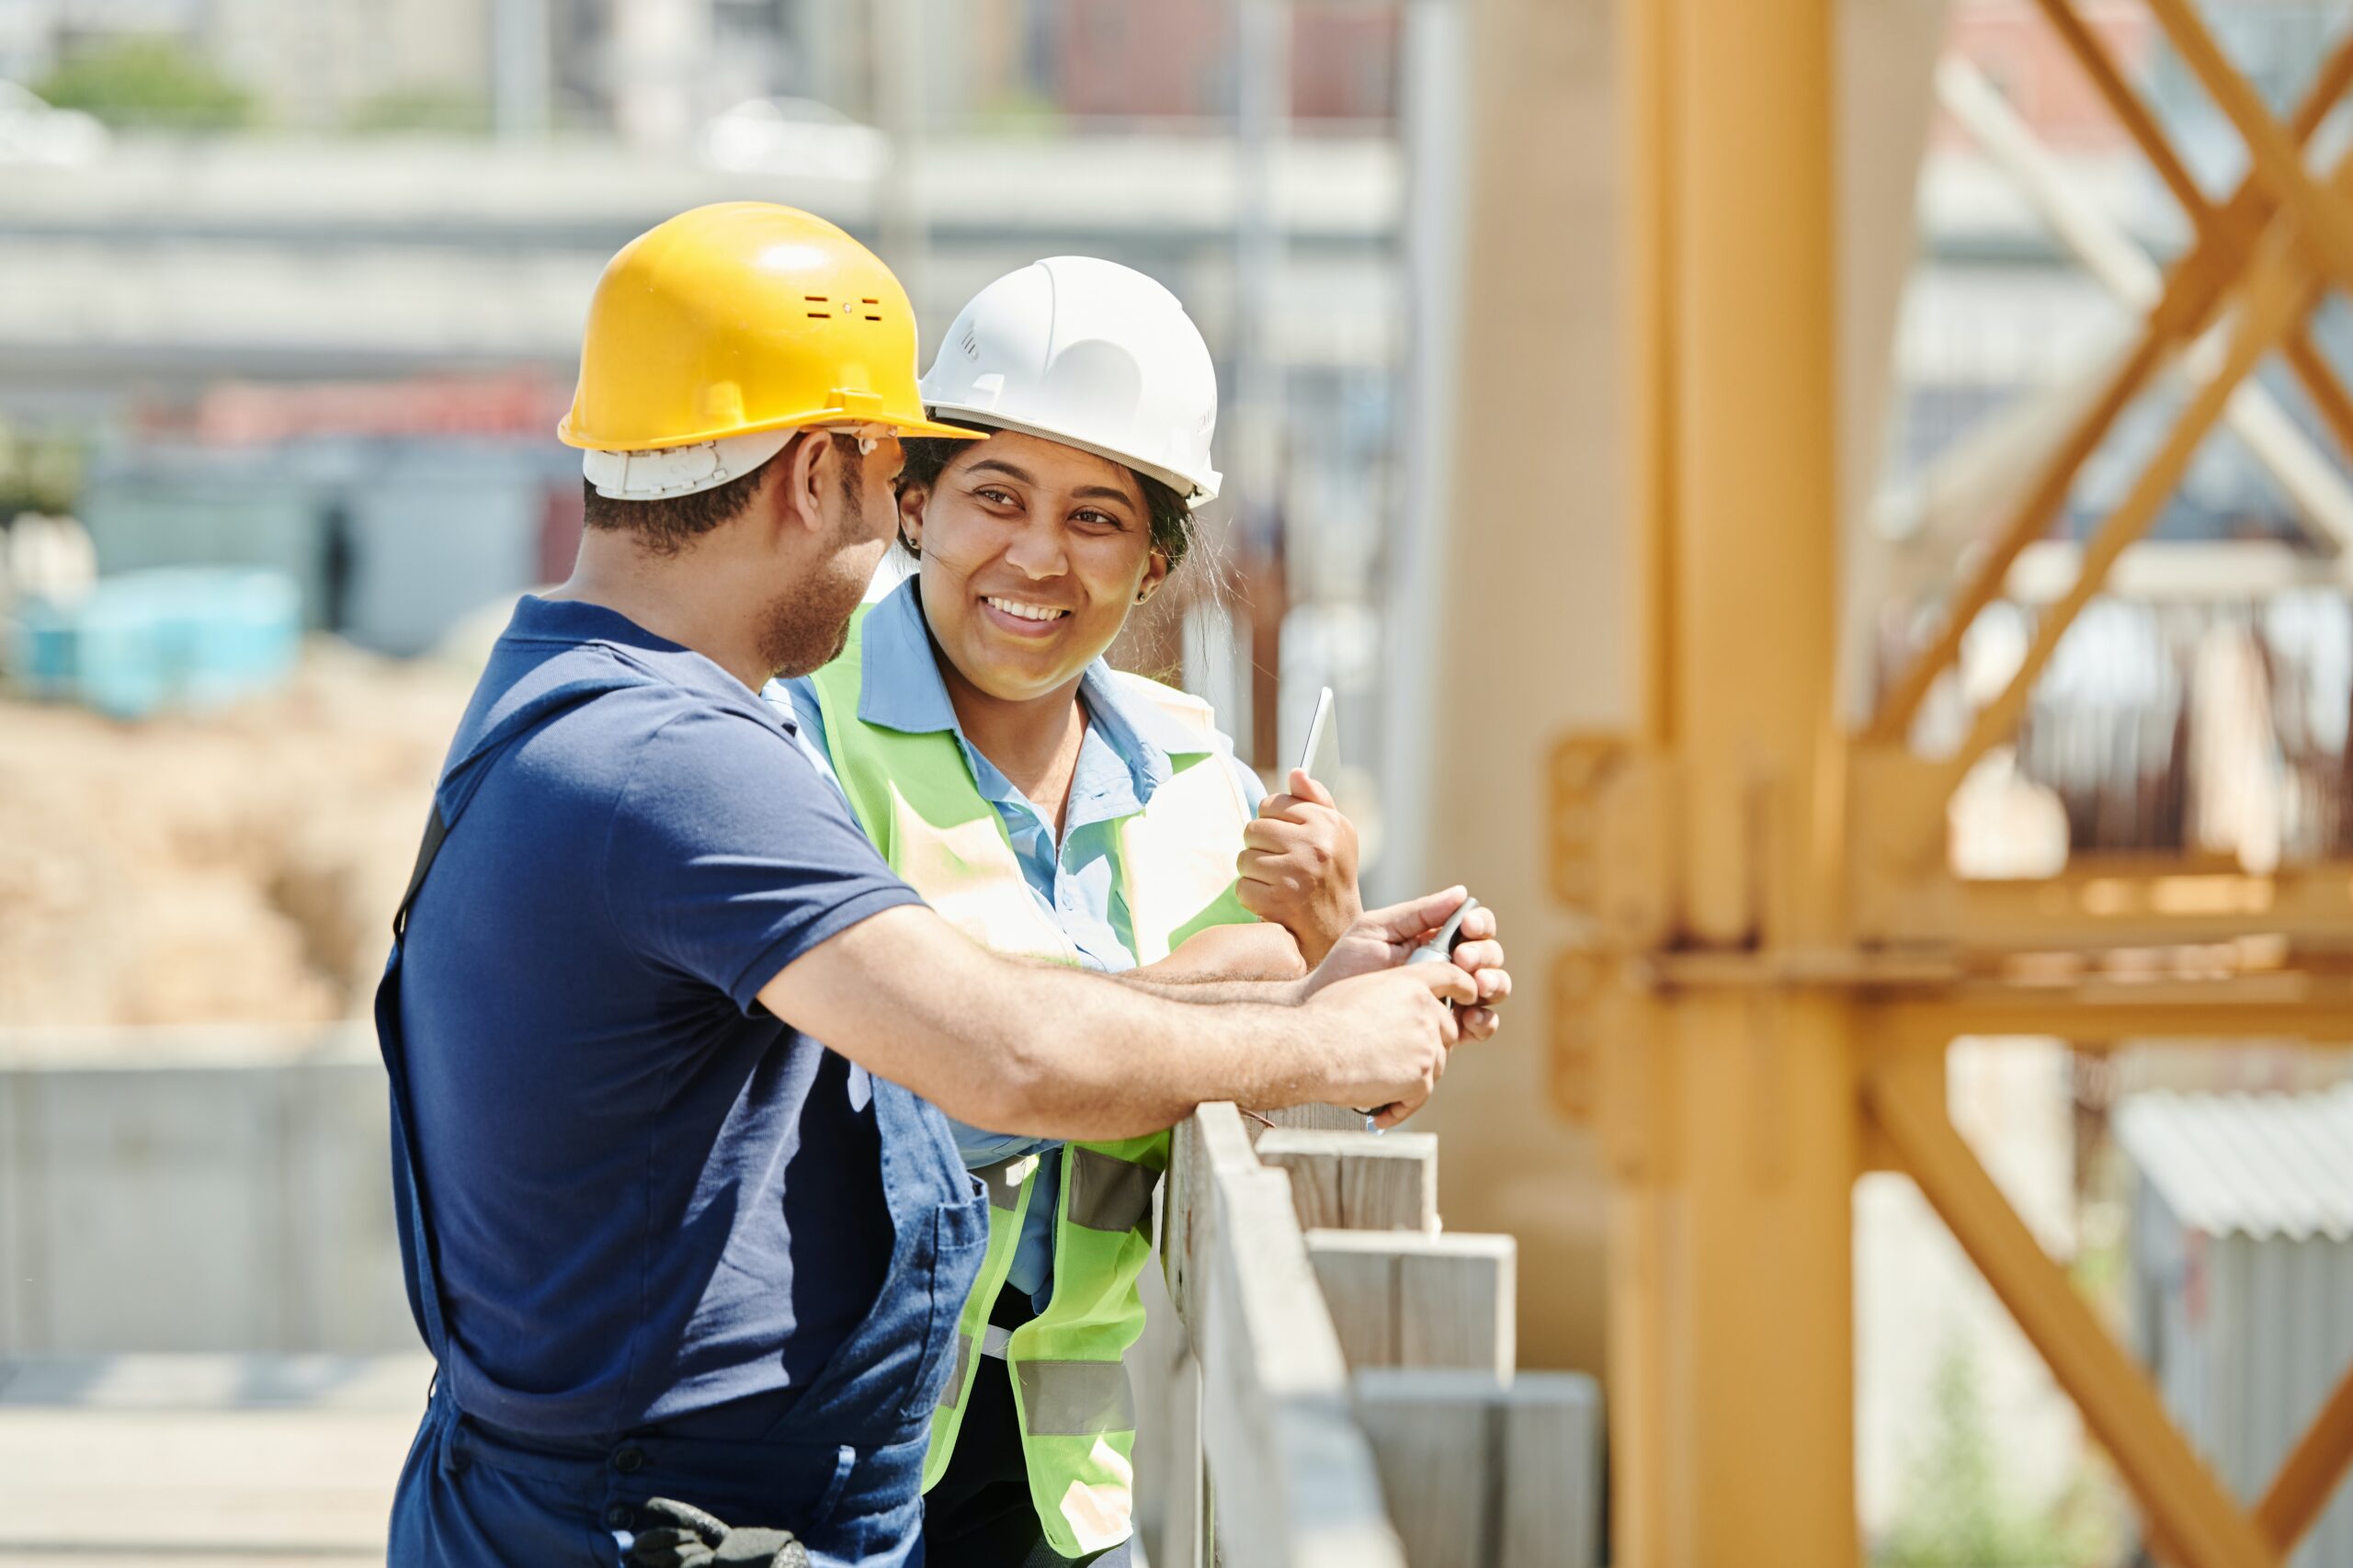 Man and woman talking on a construction site wearing hard hats